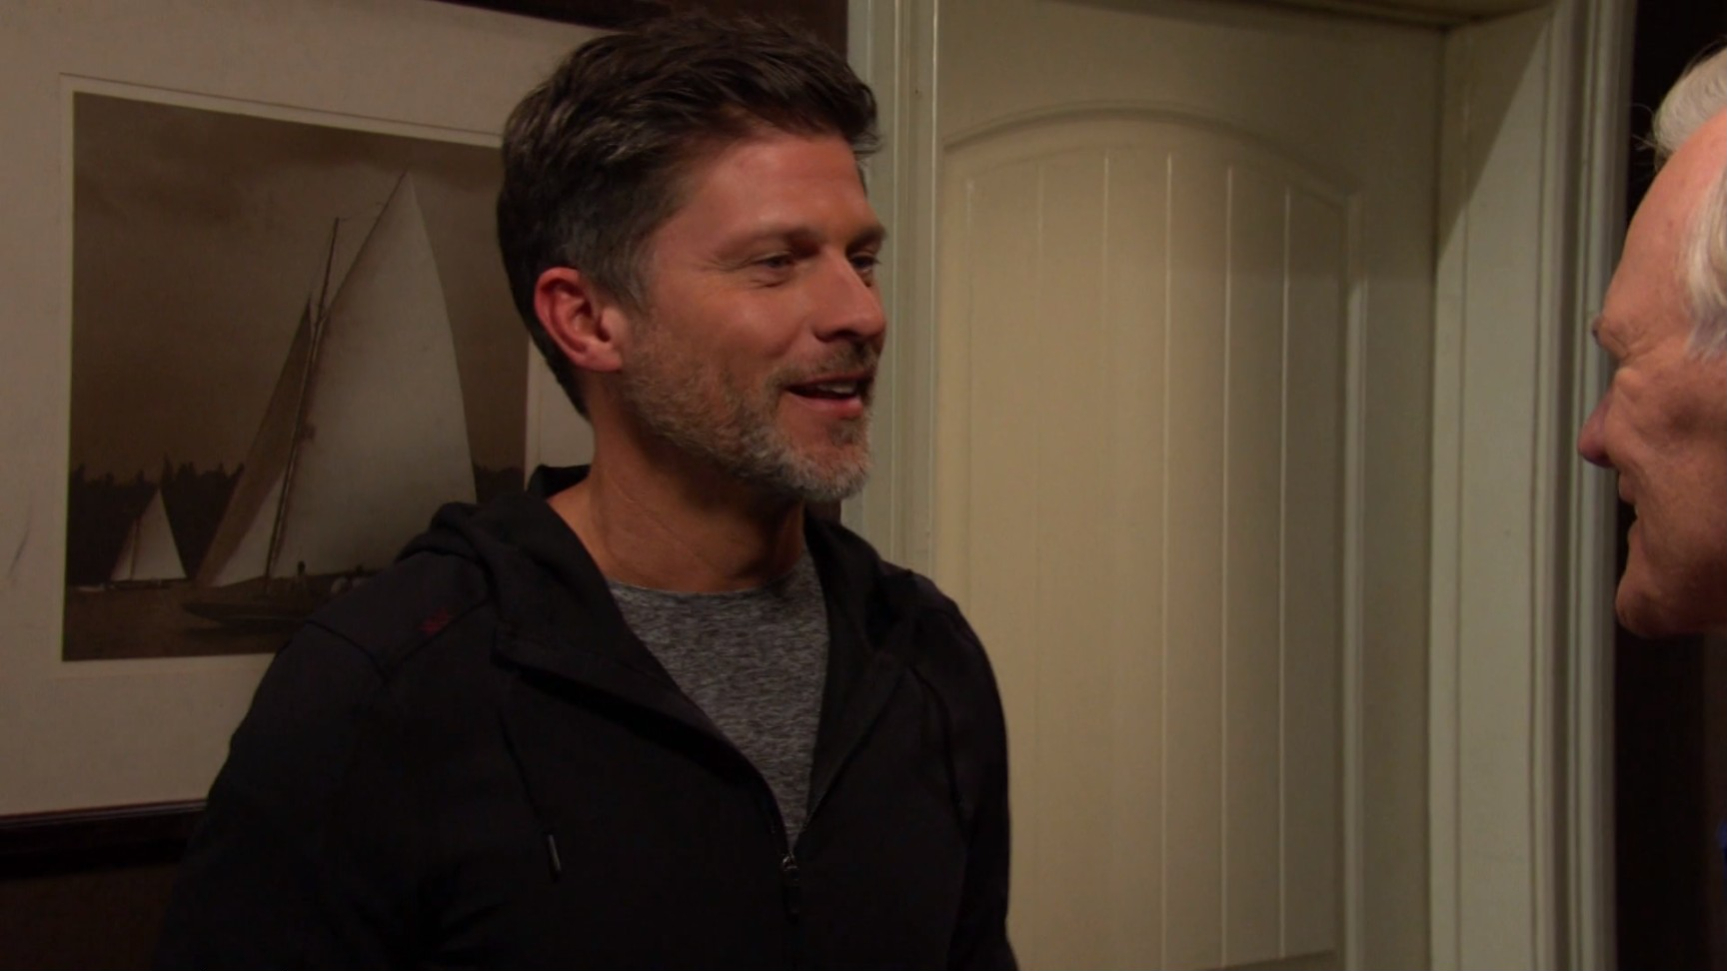 eric and roman hear sizzling Days of our lives recaps